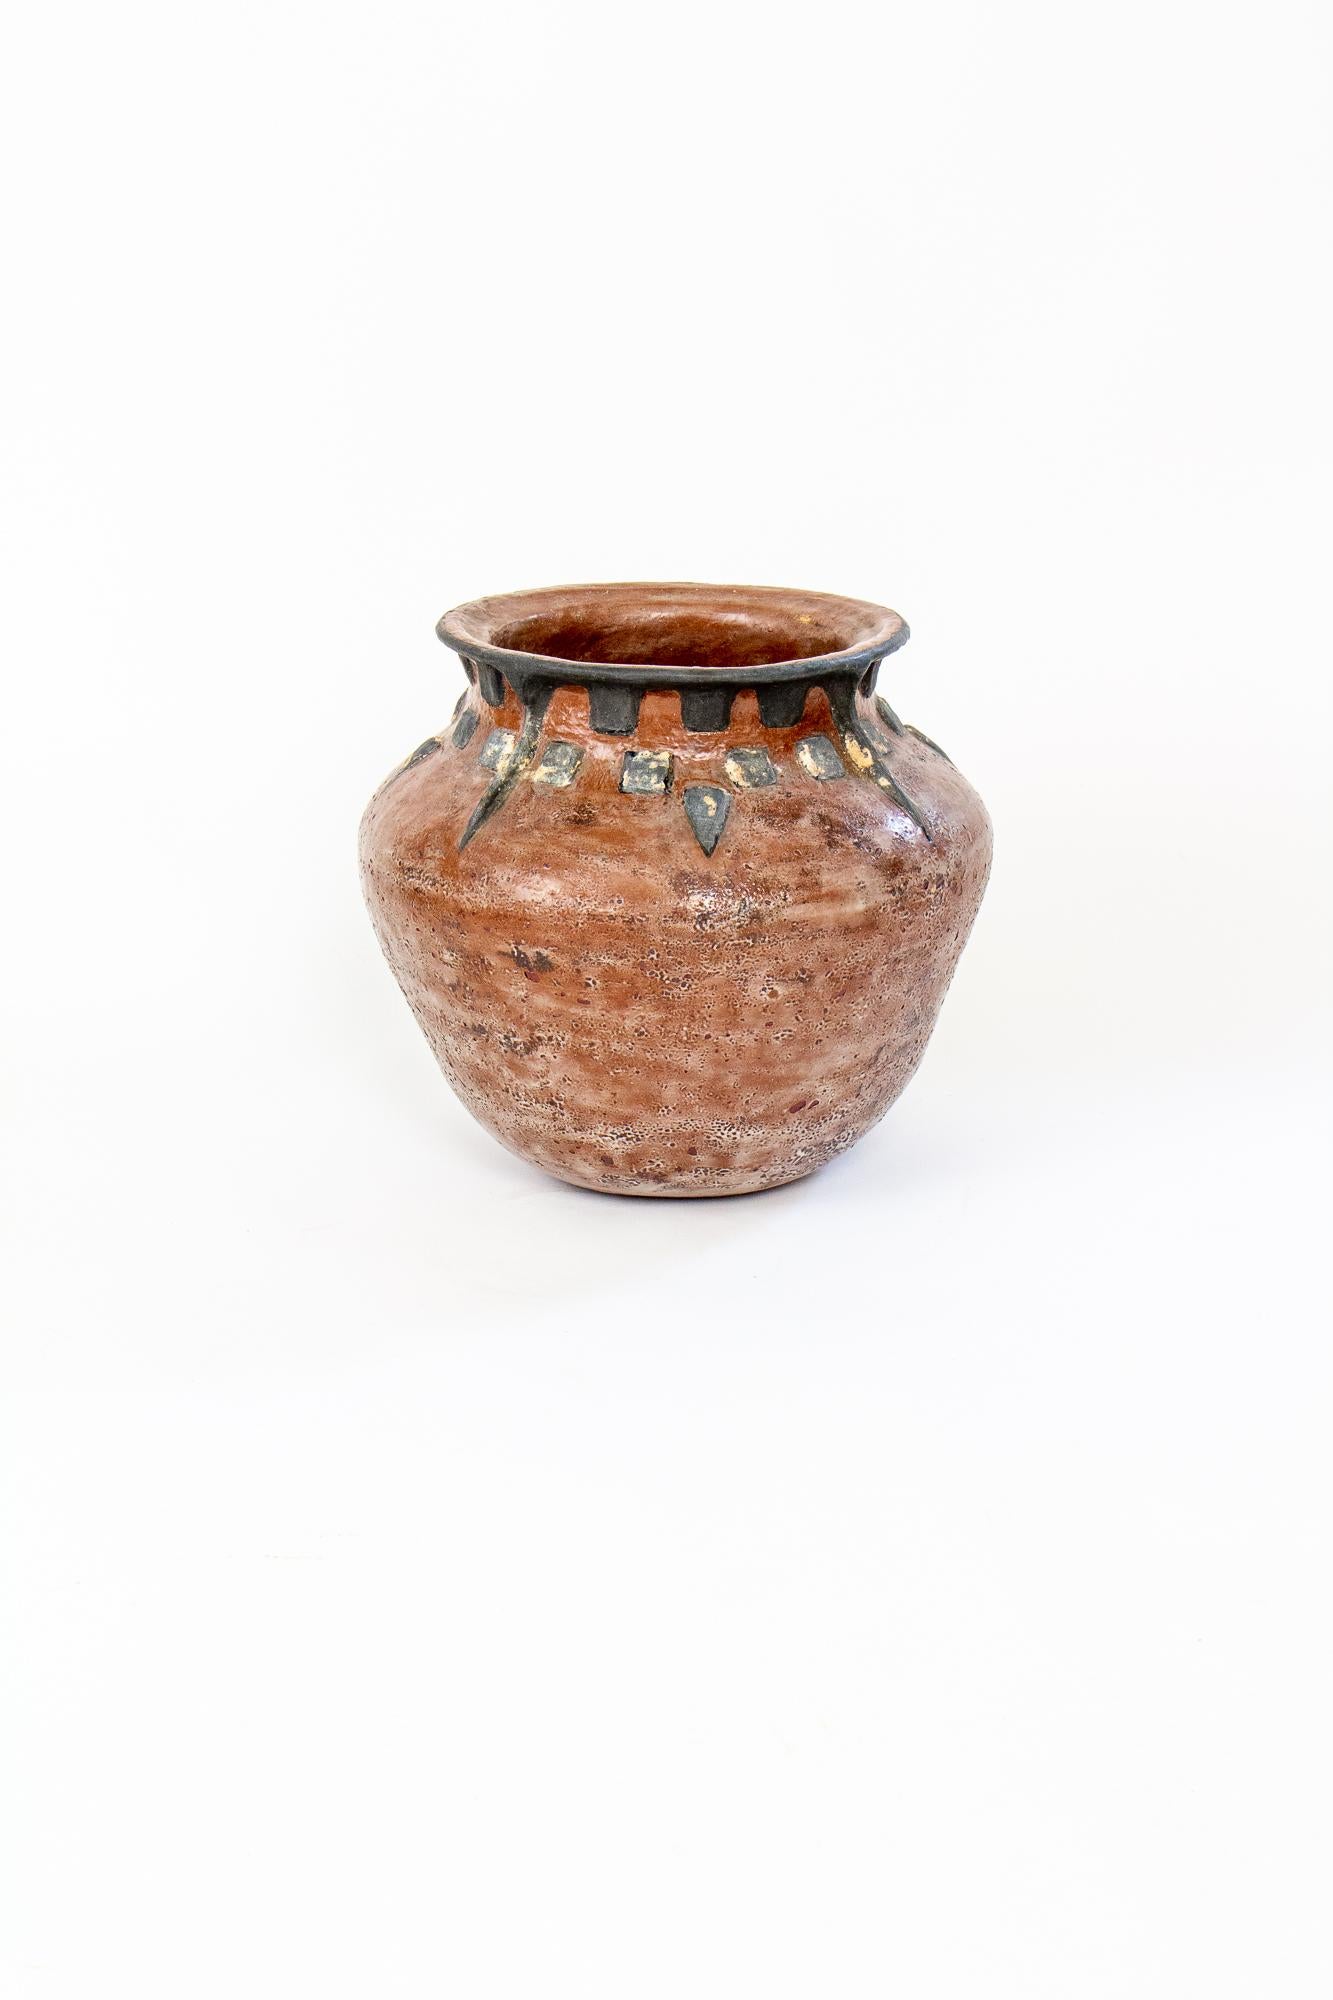 Large ceramic pot, perfect for interior plants. Made of a light colored ceramic, with black and red-brown glaze to resemble earthenware. Rustic design with triangles and squares, and a rough finish. Signed, “WMG”.